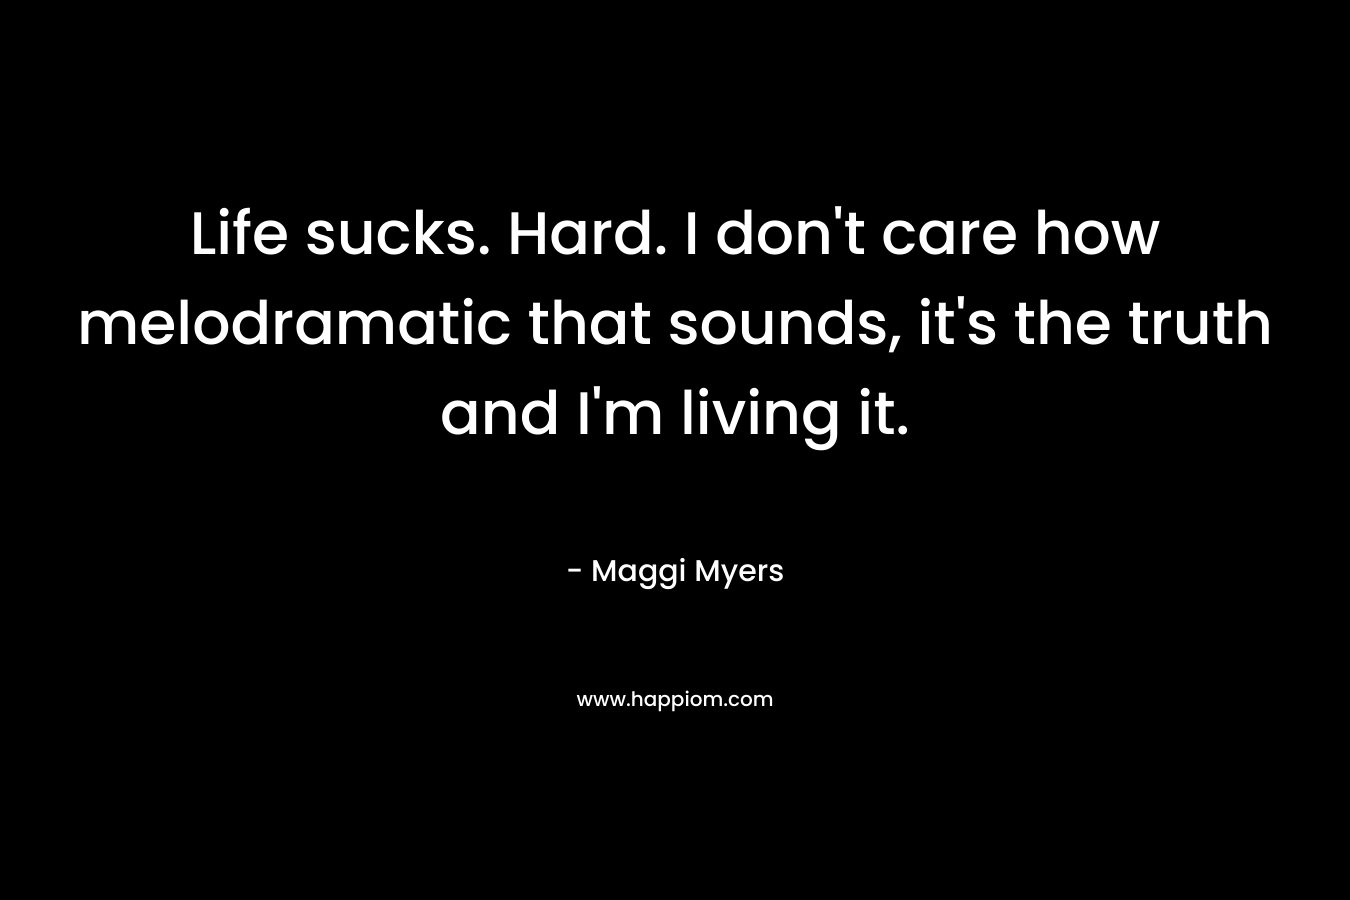 Life sucks. Hard. I don’t care how melodramatic that sounds, it’s the truth and I’m living it. – Maggi Myers